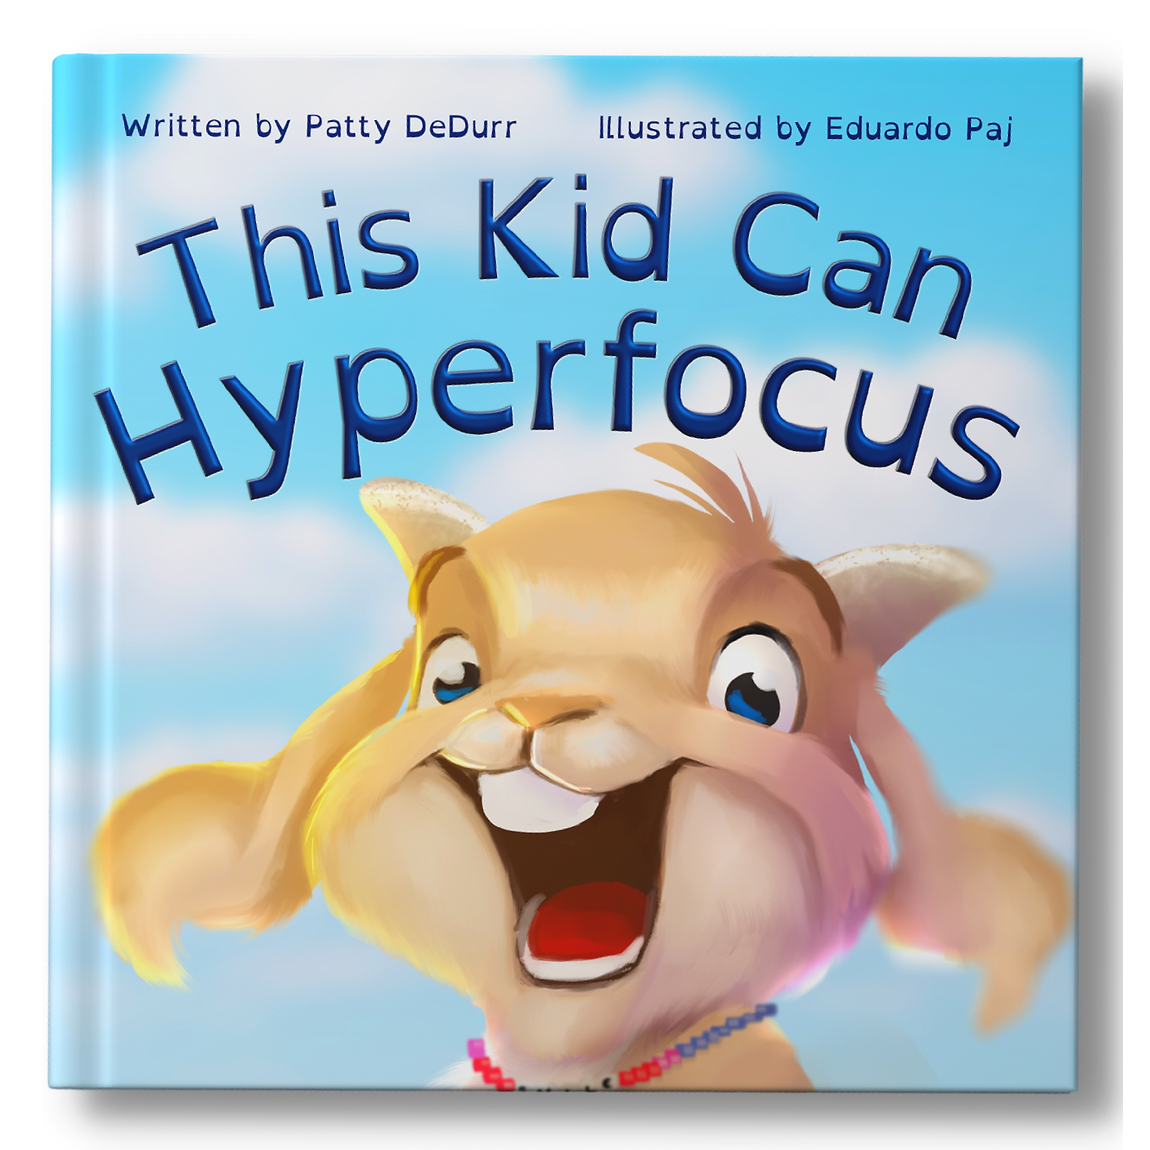 This Kid Can Hyperfocus